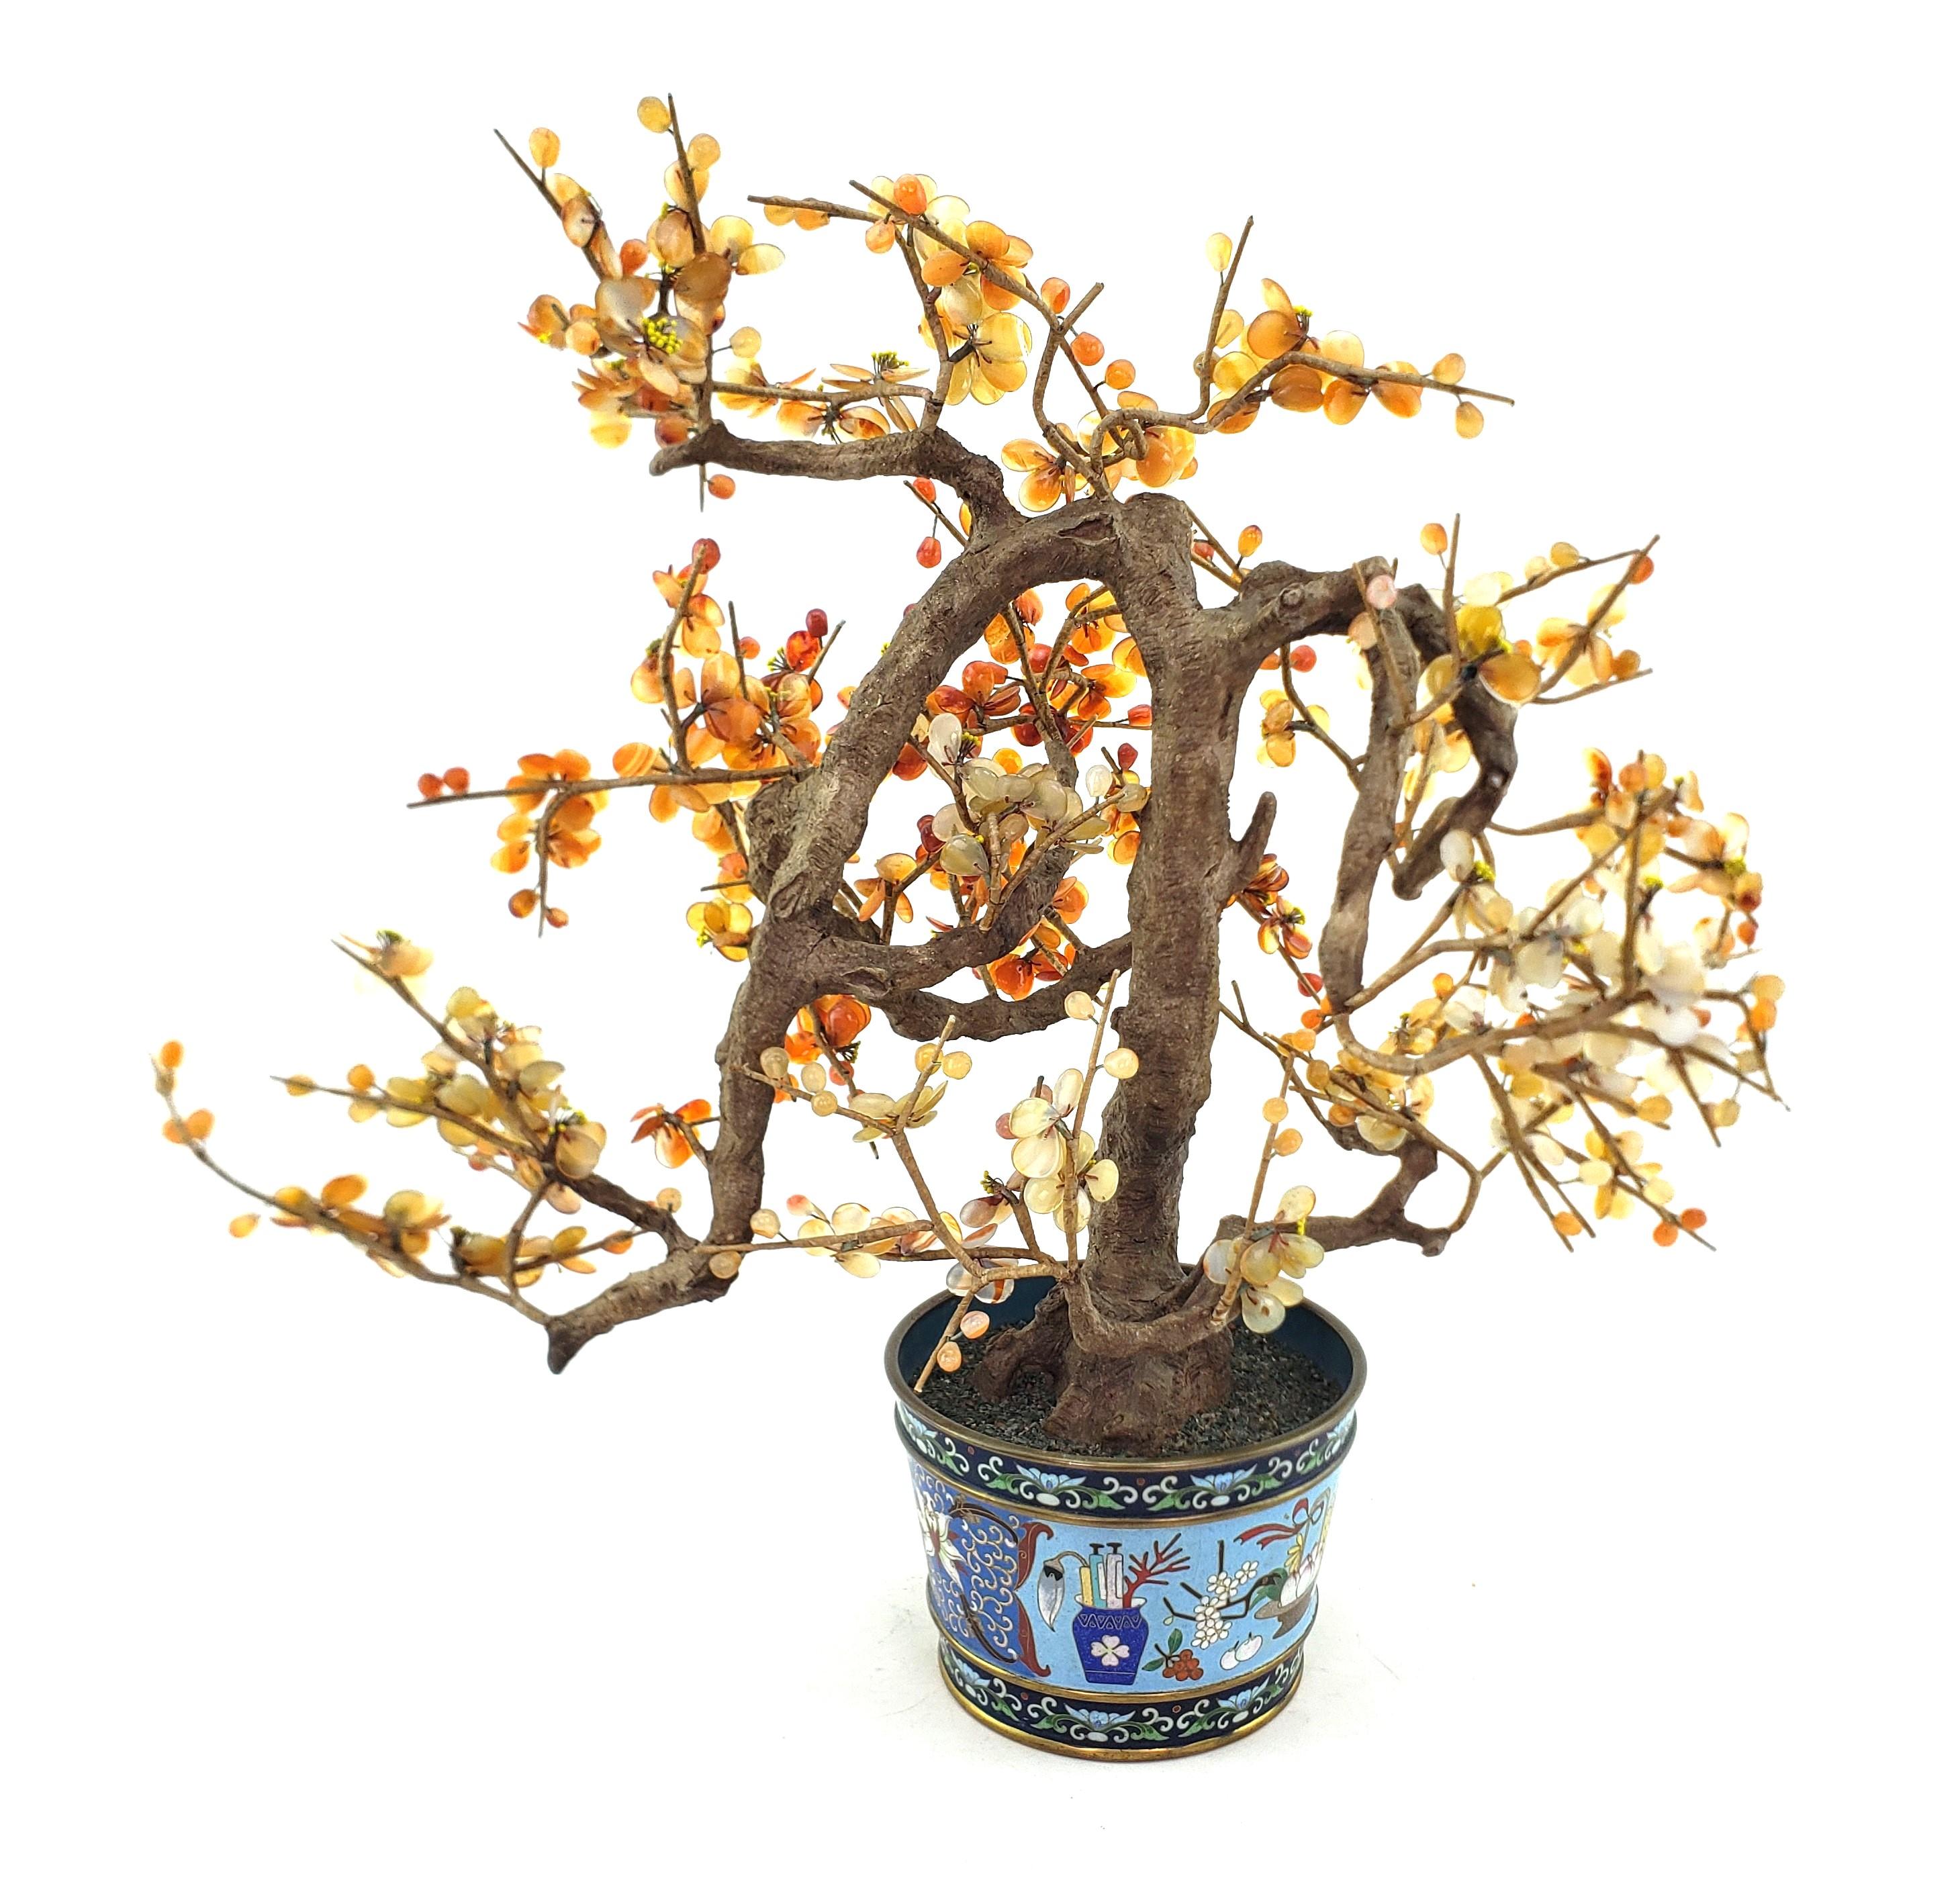 Metal Antique Chinese Bonzai Styled Flowering Fruit Tree Sculpture with Cloisonne Pot For Sale